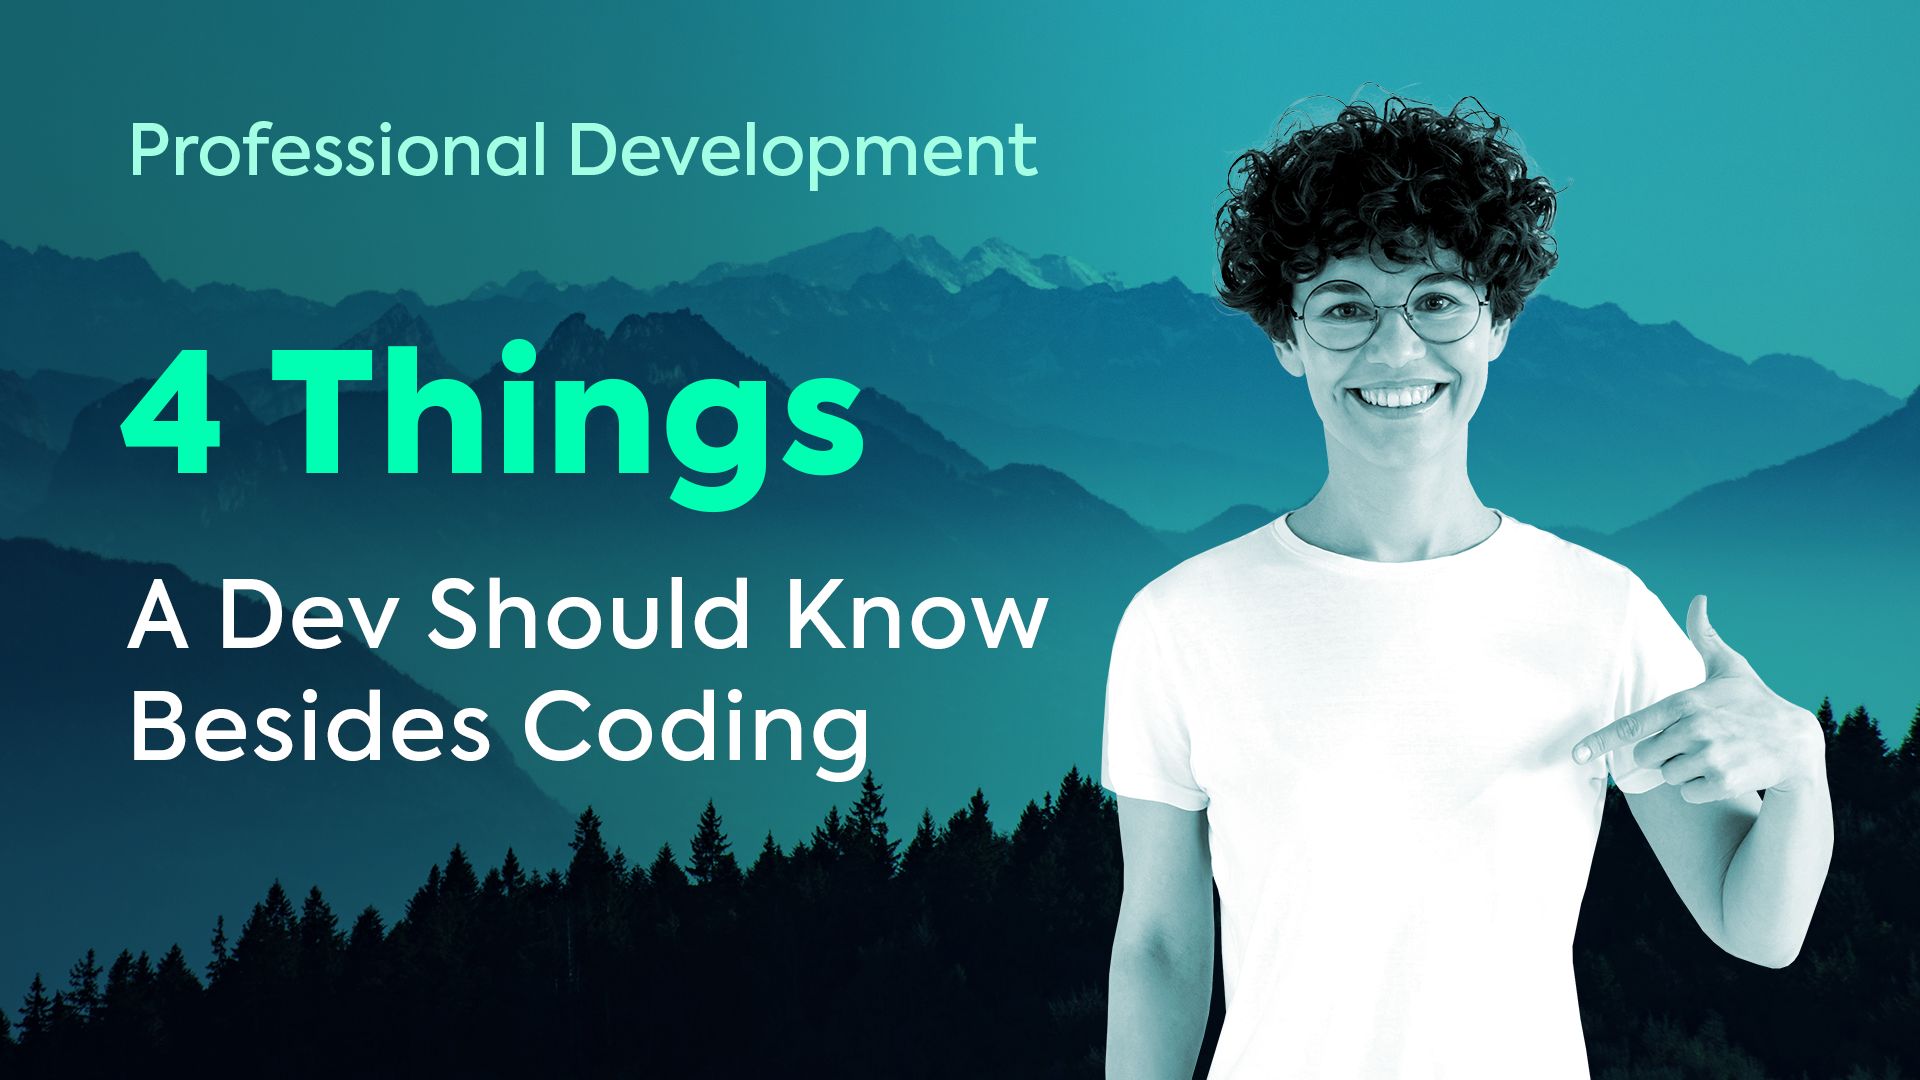 4 Things a Dev Should Know Besides Coding 